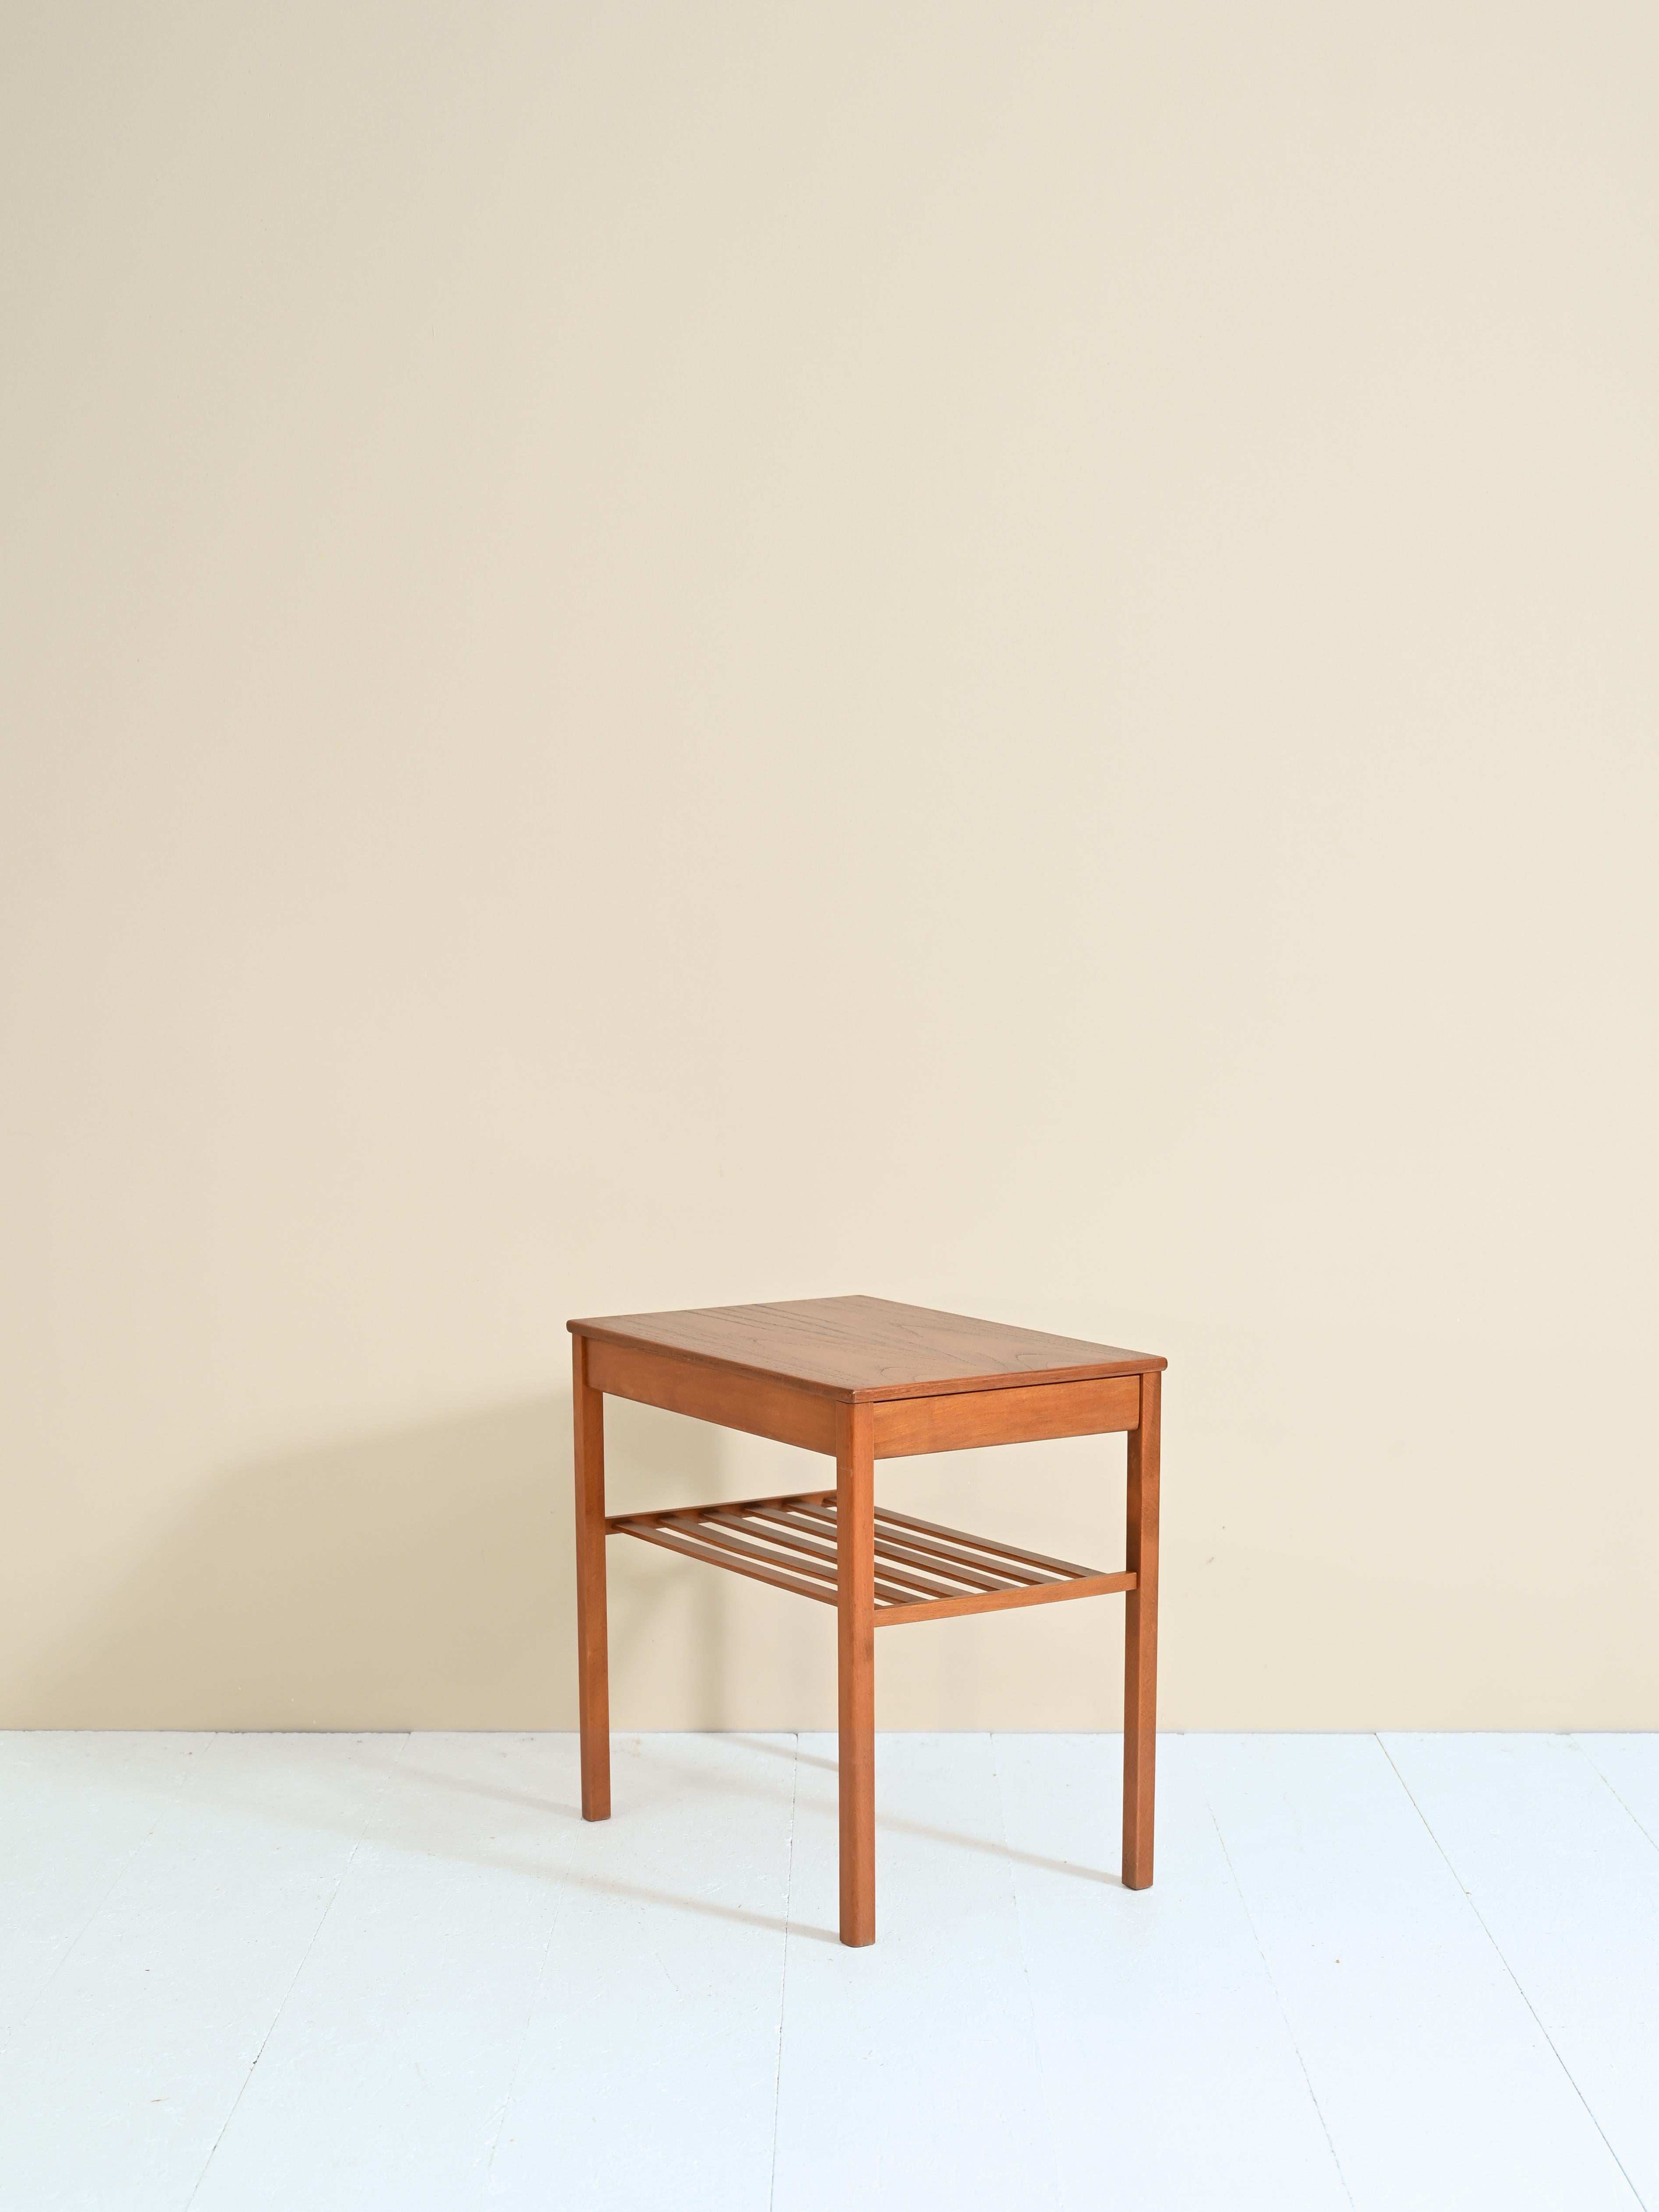 Swedish Teak Coffee Table/Bedside Table from the Company Tingströms 3